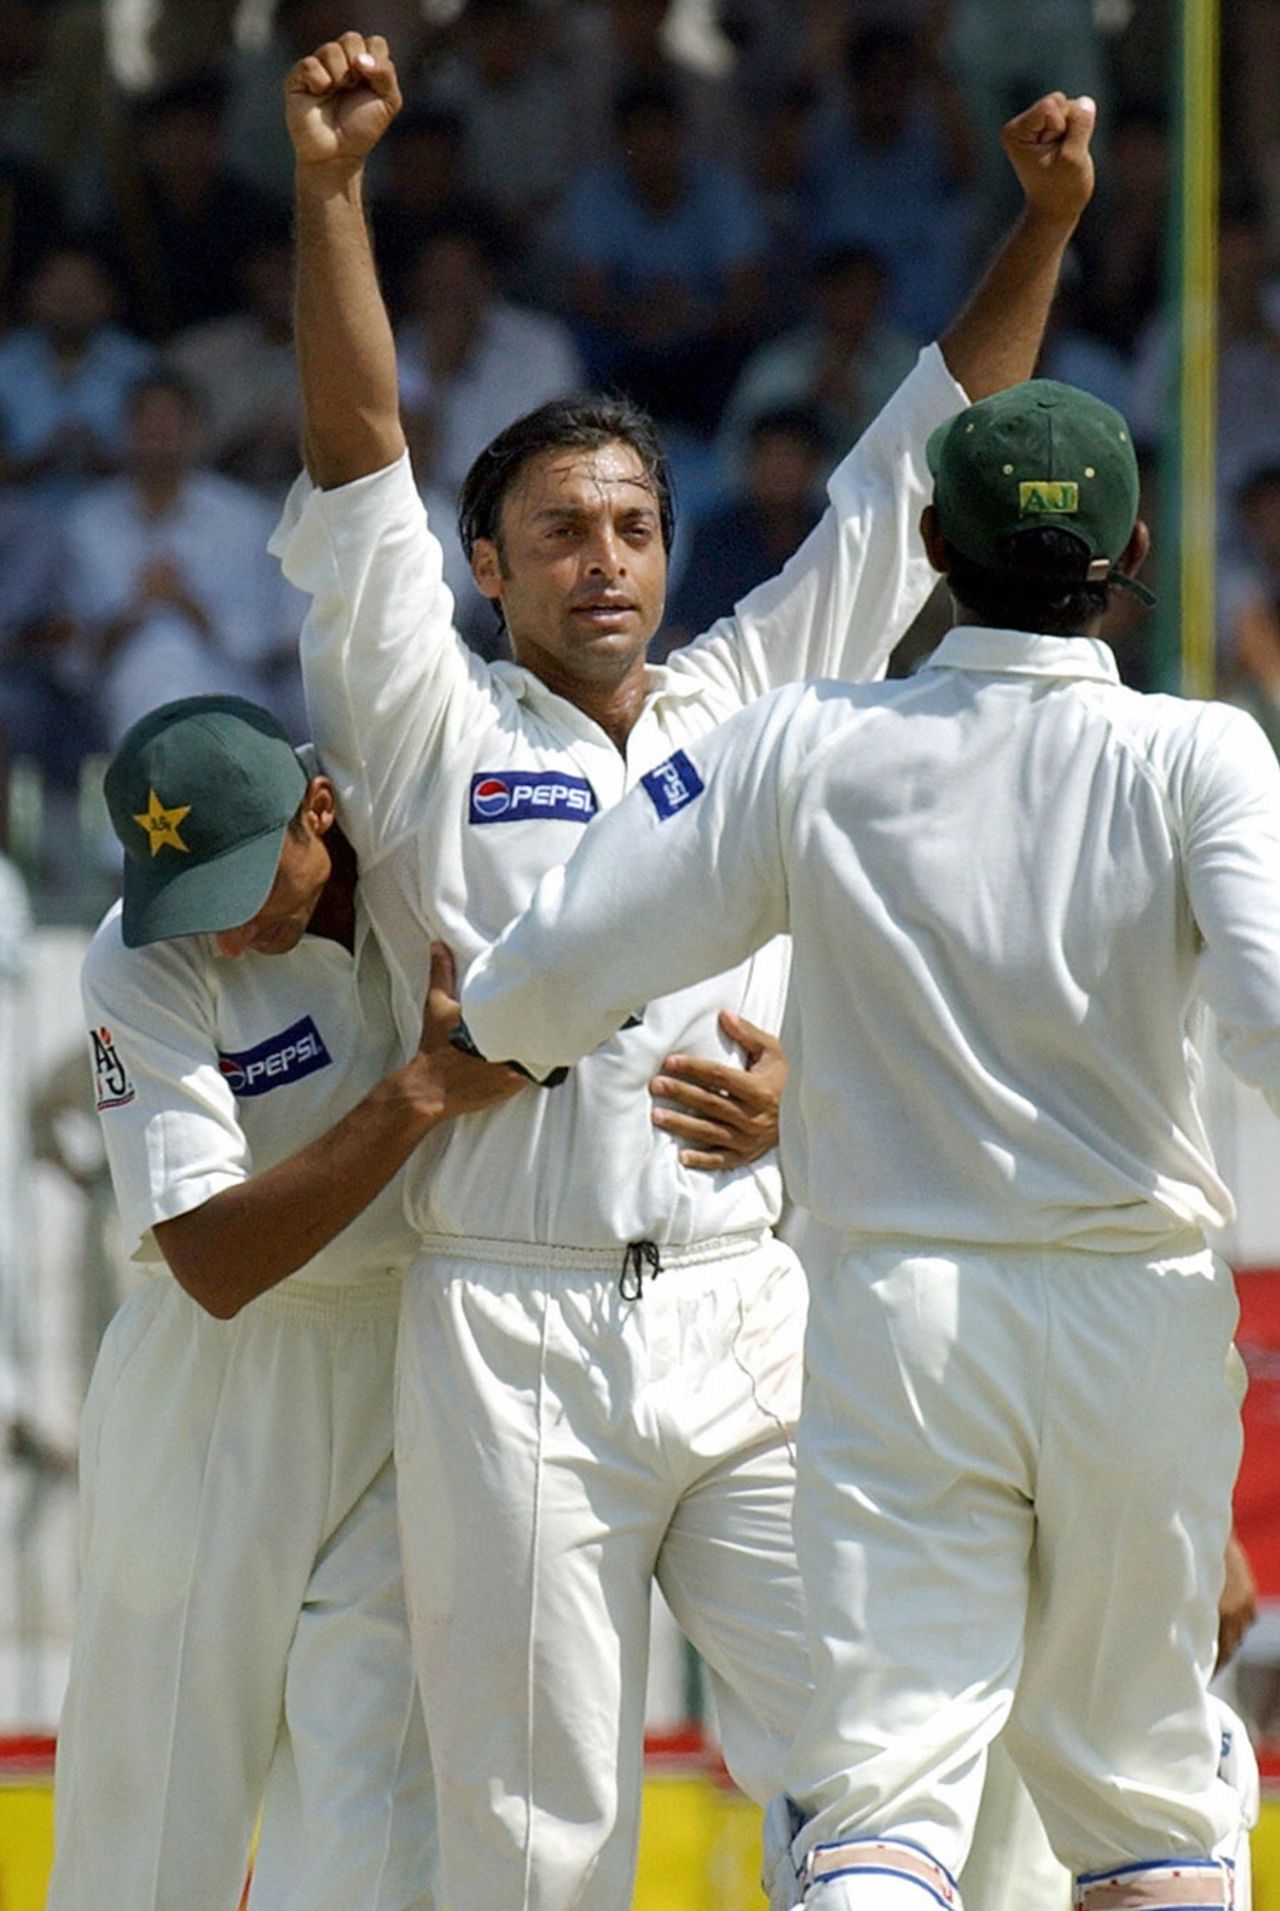 Shoaib Akhtar gets to a hundred Test wickets, Pakistan v Bangladesh, 2nd Test, Day 4, Peshawar, August 30, 2003